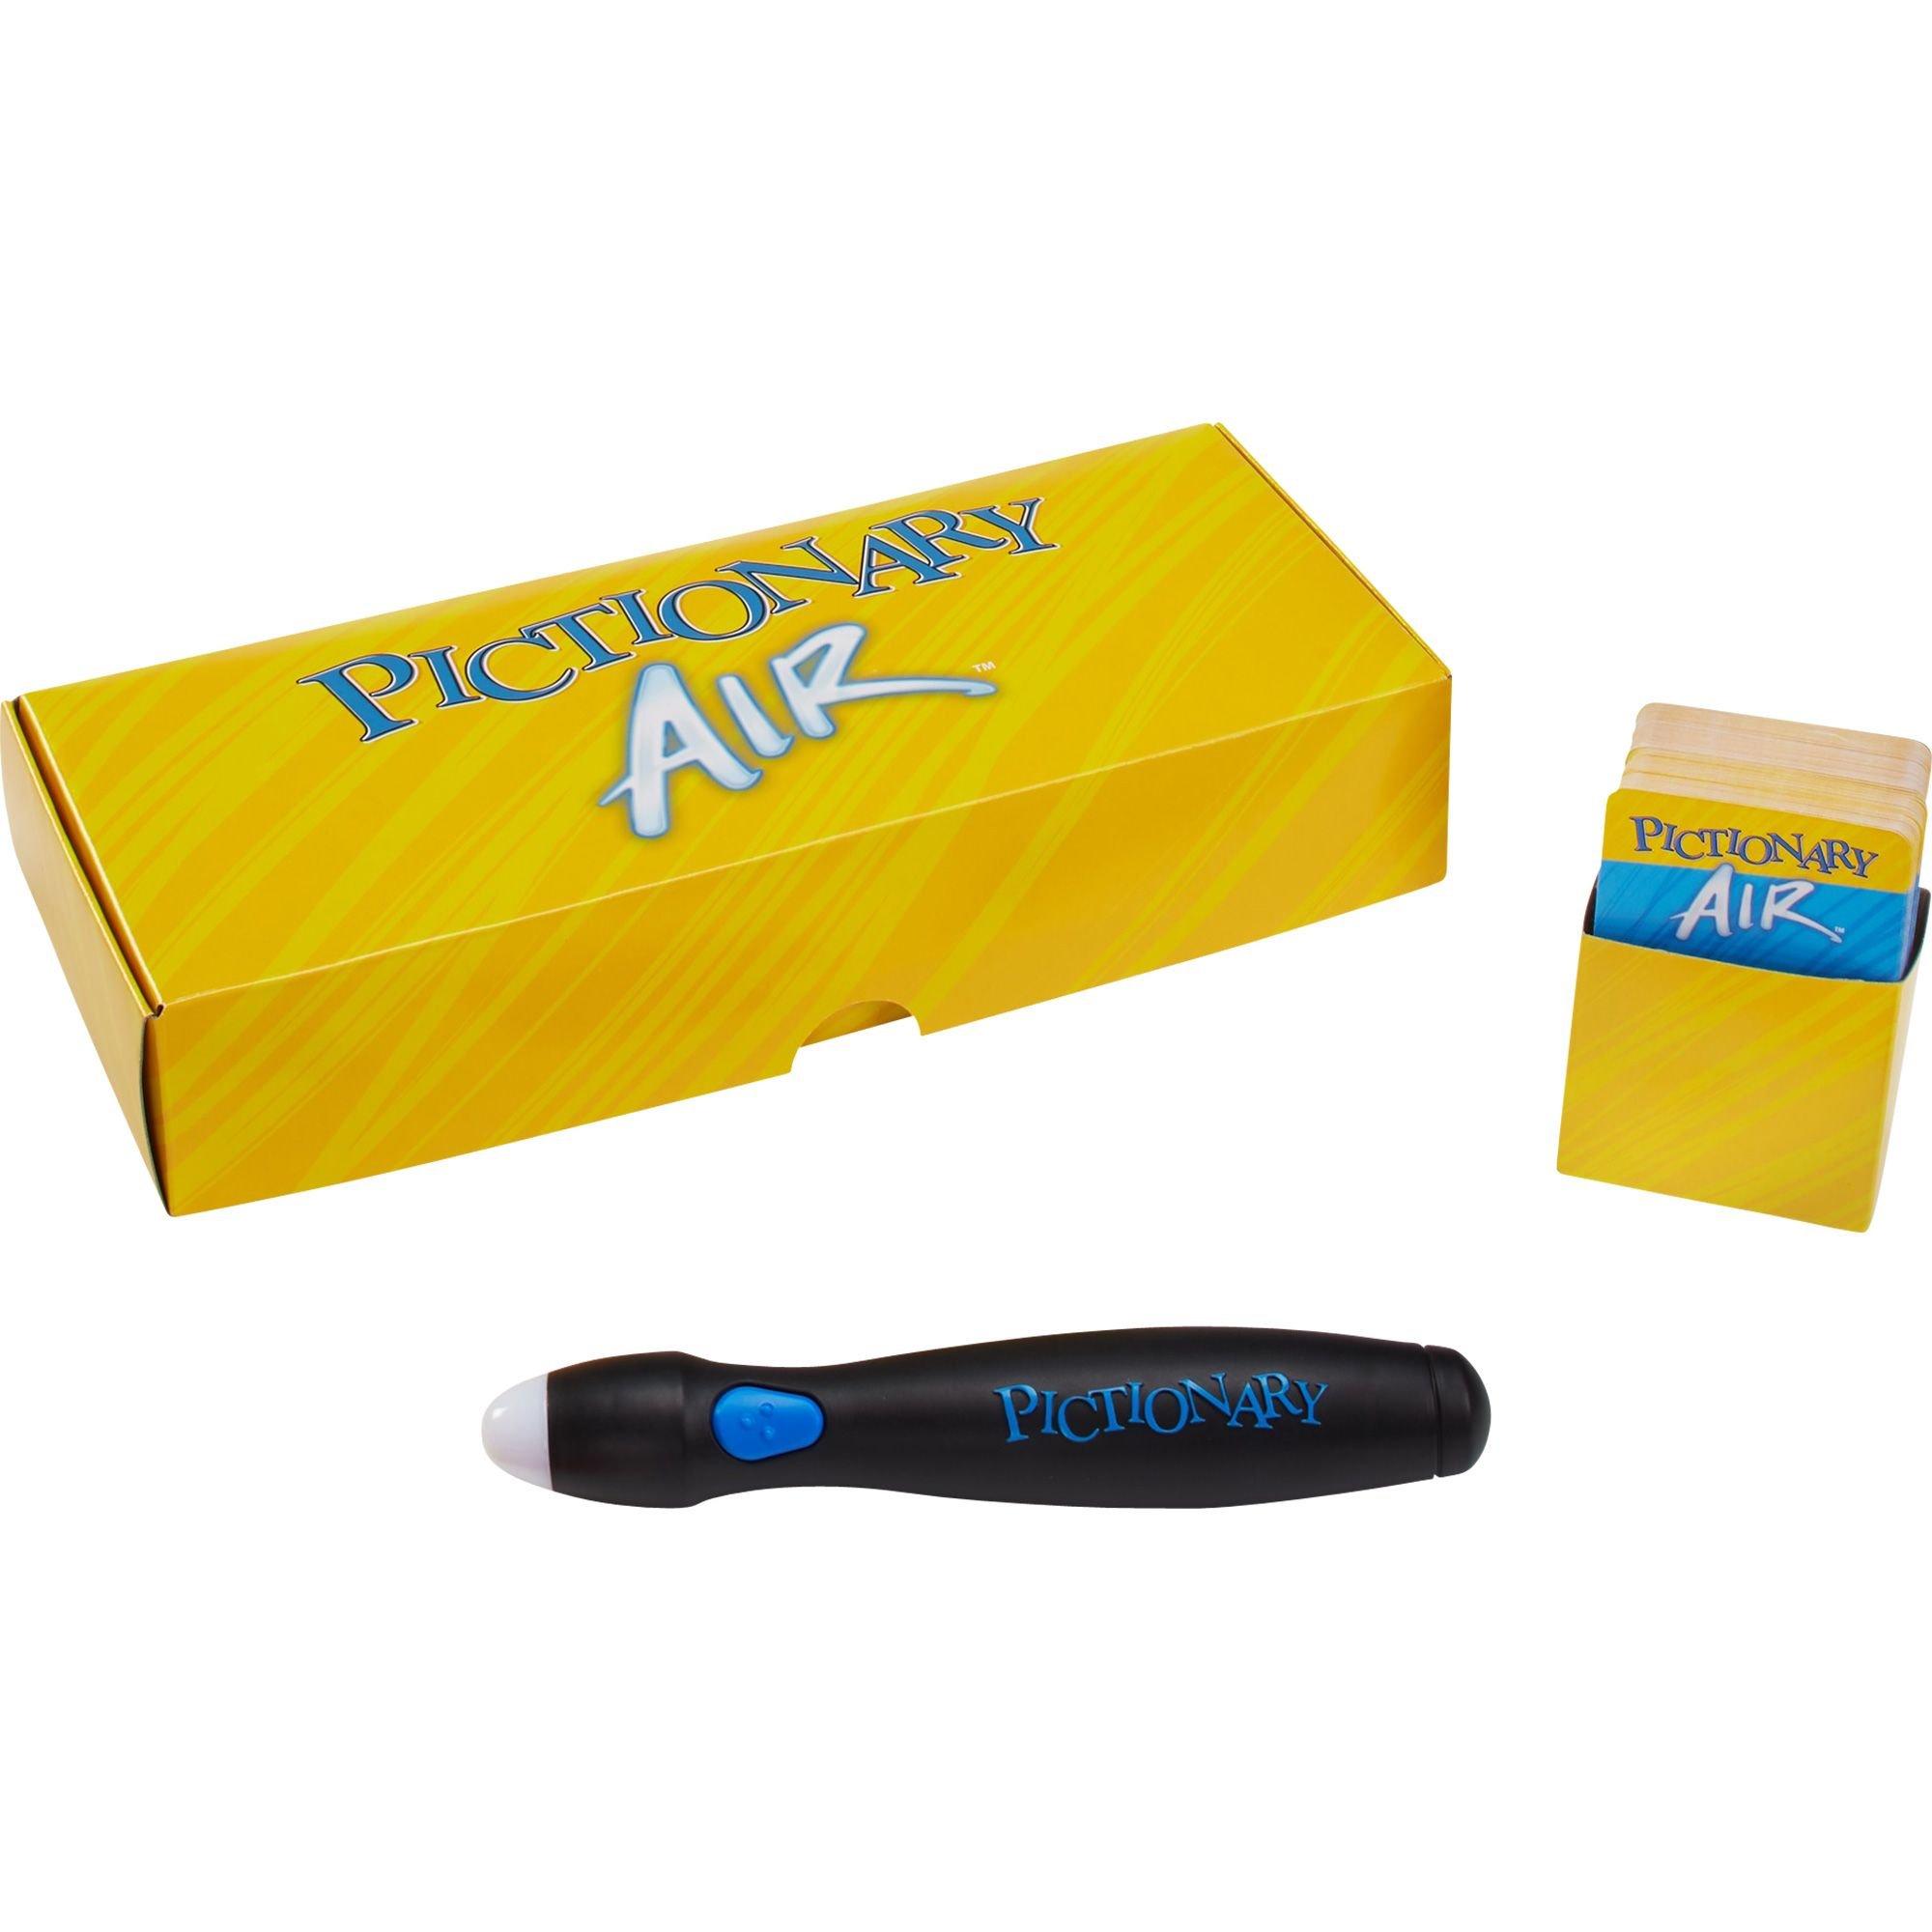 Pictionary Air | Party City